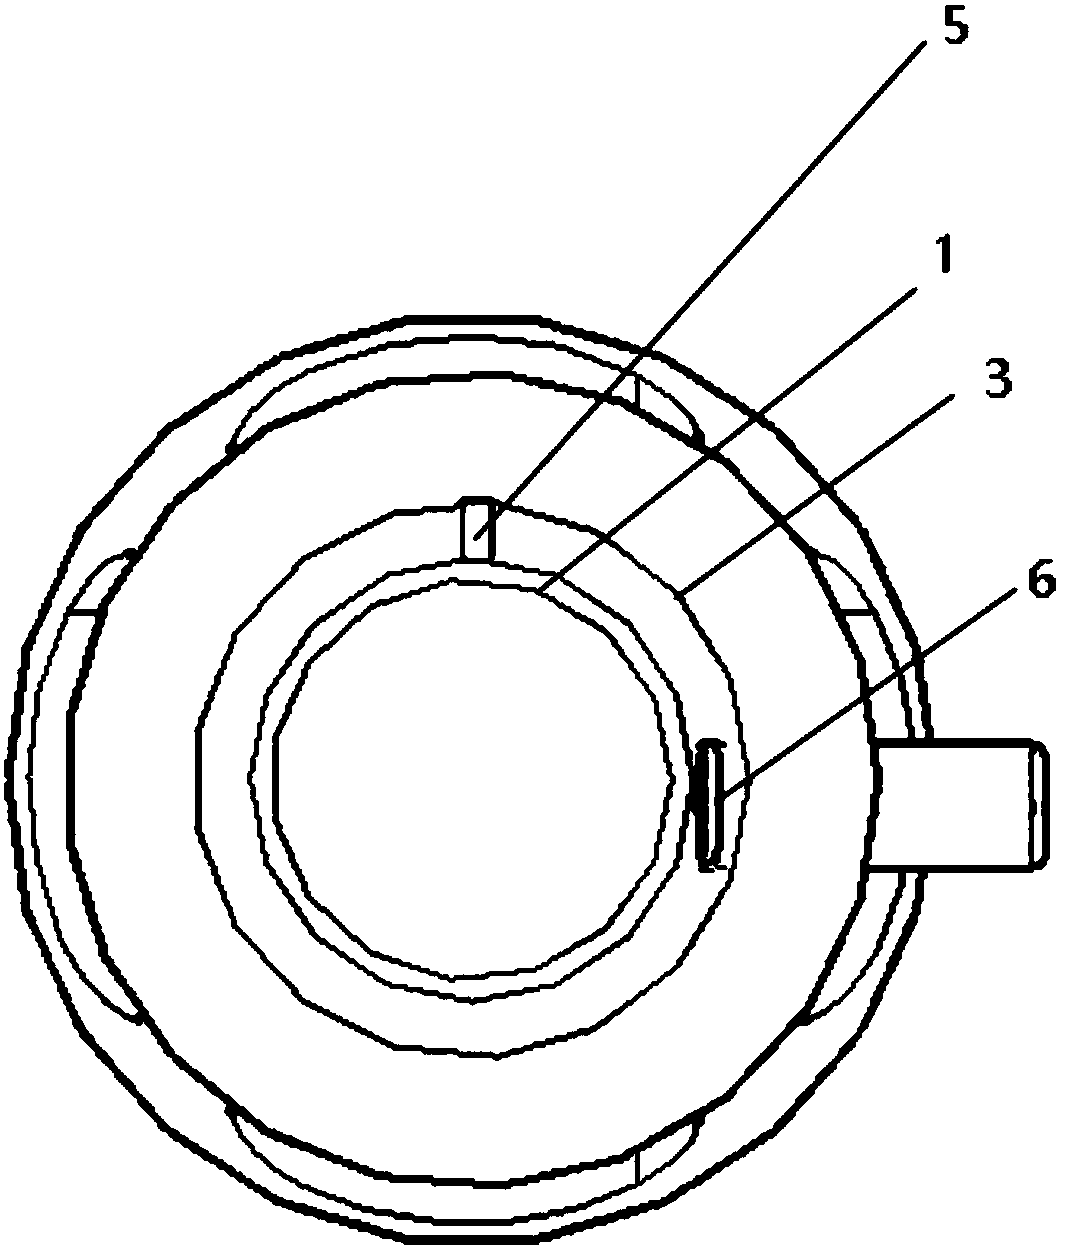 Hollow double-layer anal canal fixing device